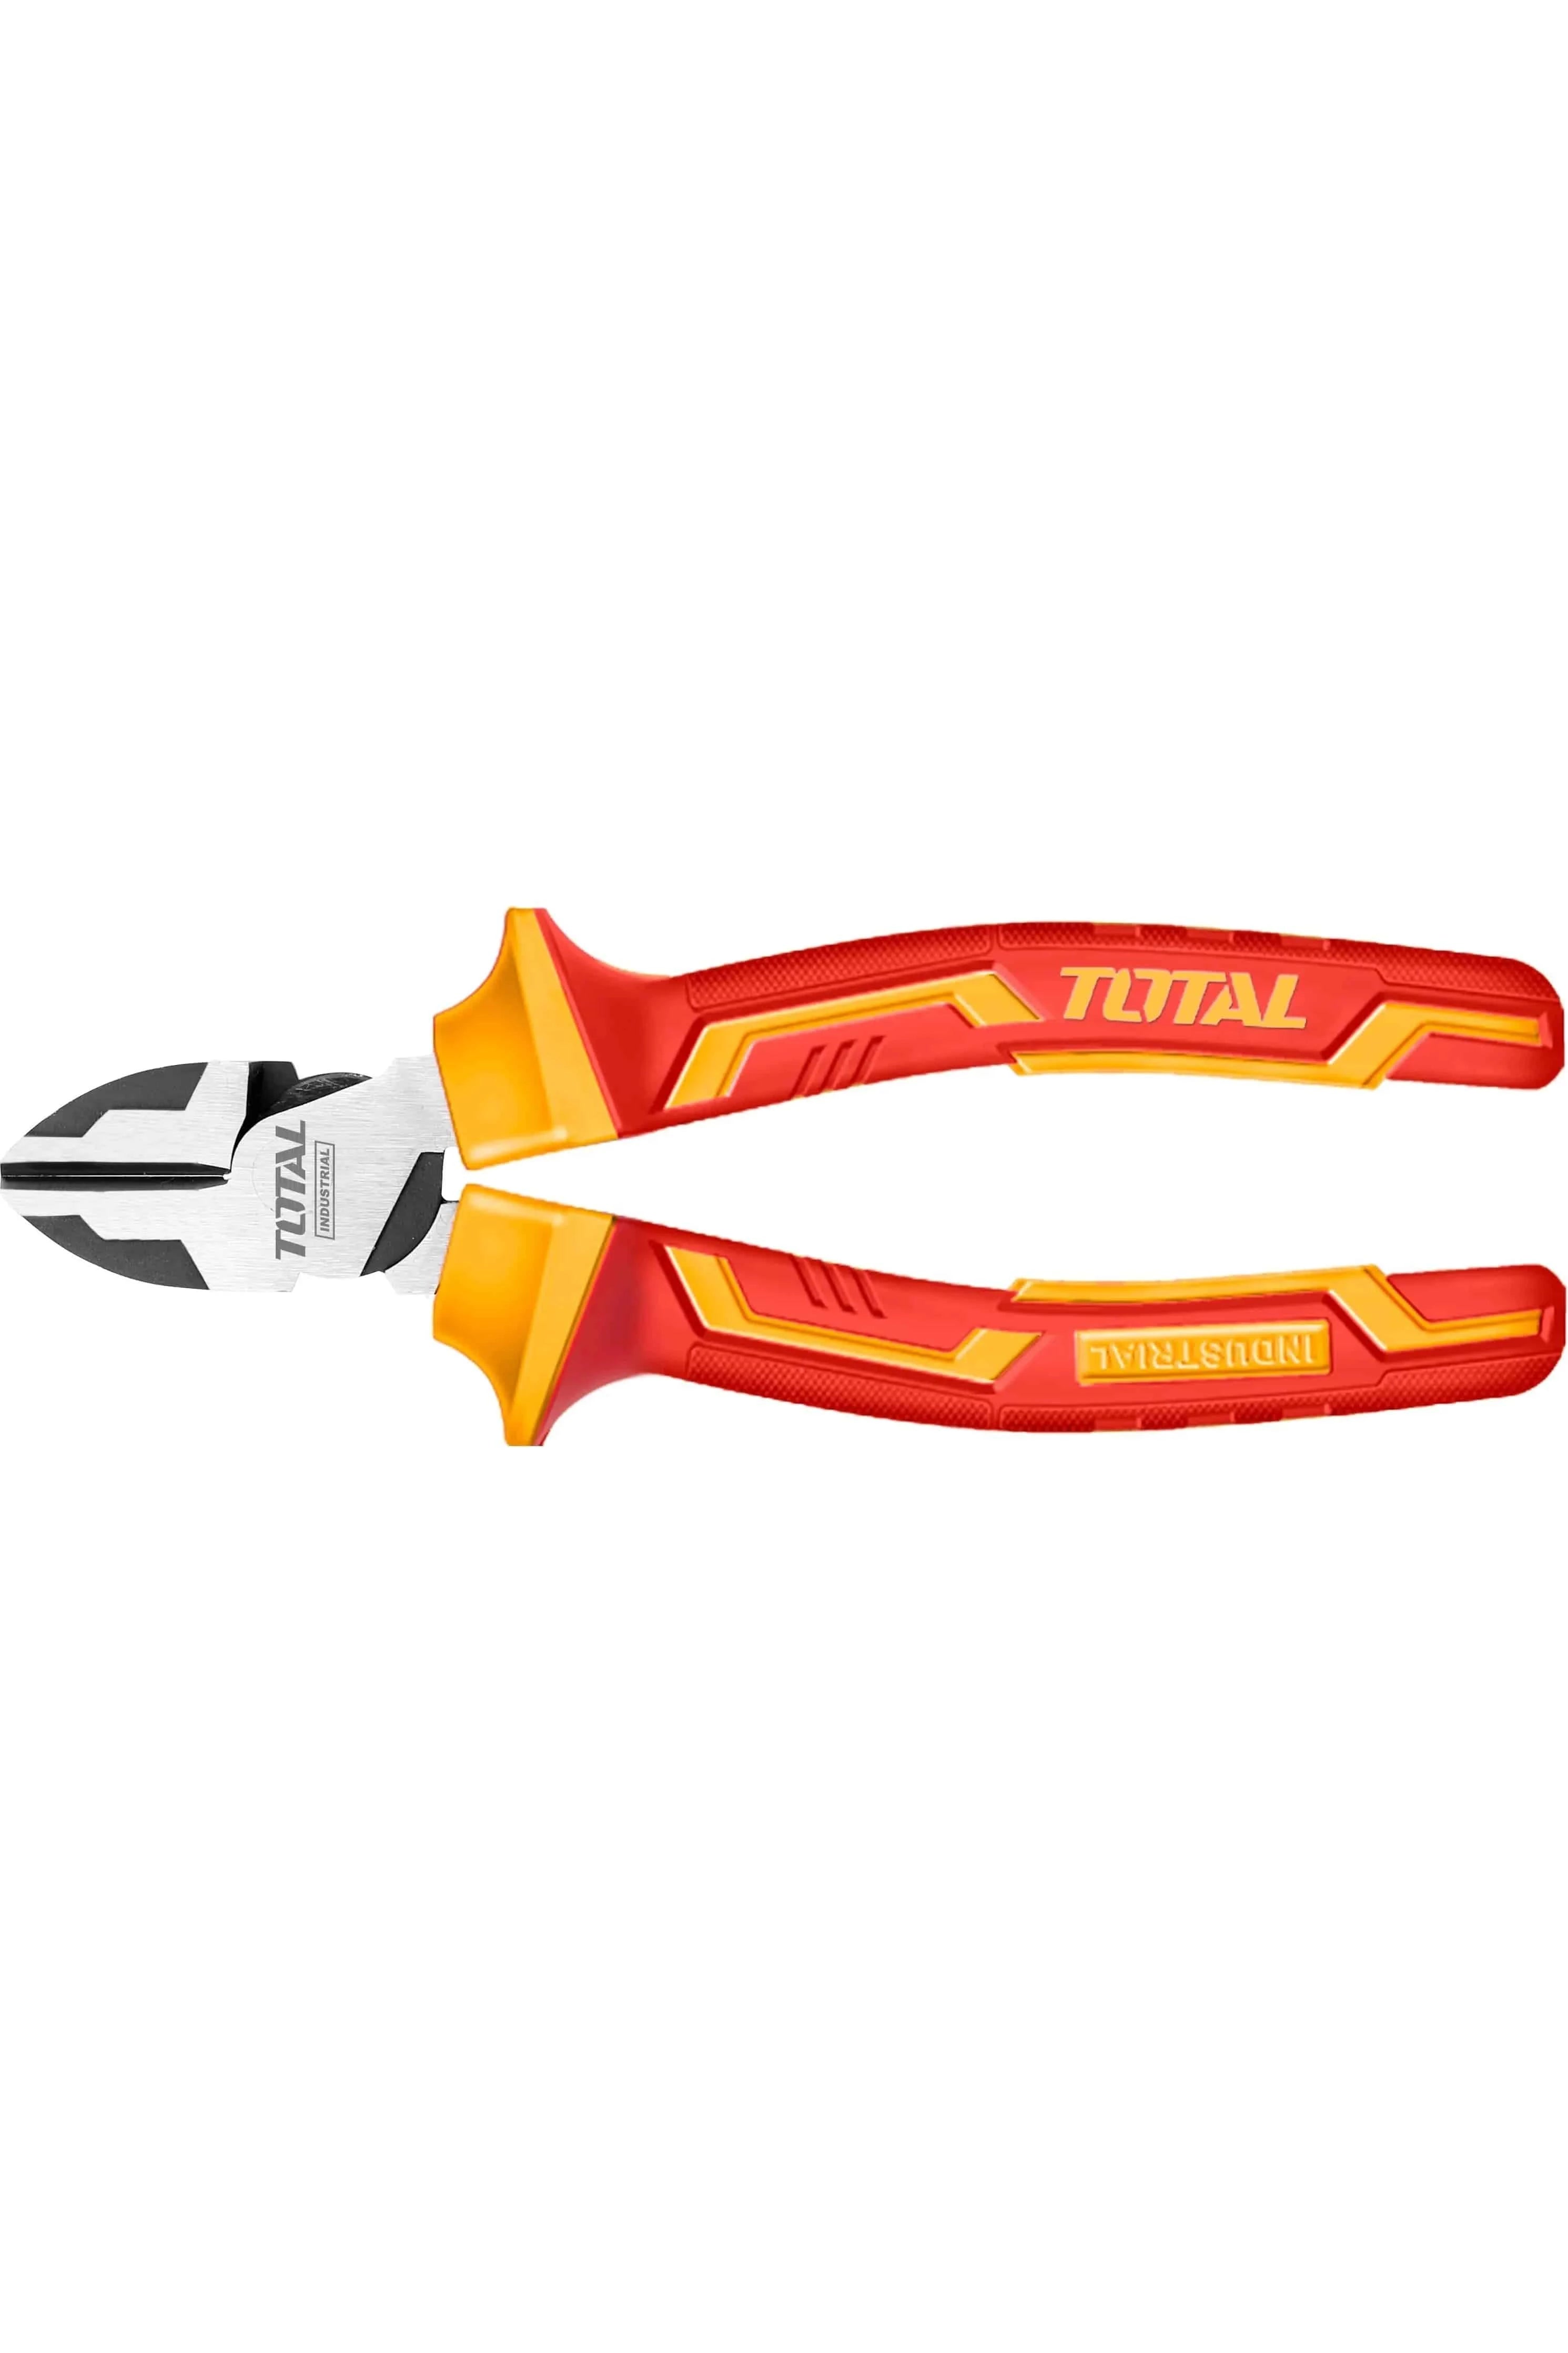 TOTAL INSULATED HIGH LEVERAGE DIAGONAL CUTTING PLIERS - Elite Renewable Solutions